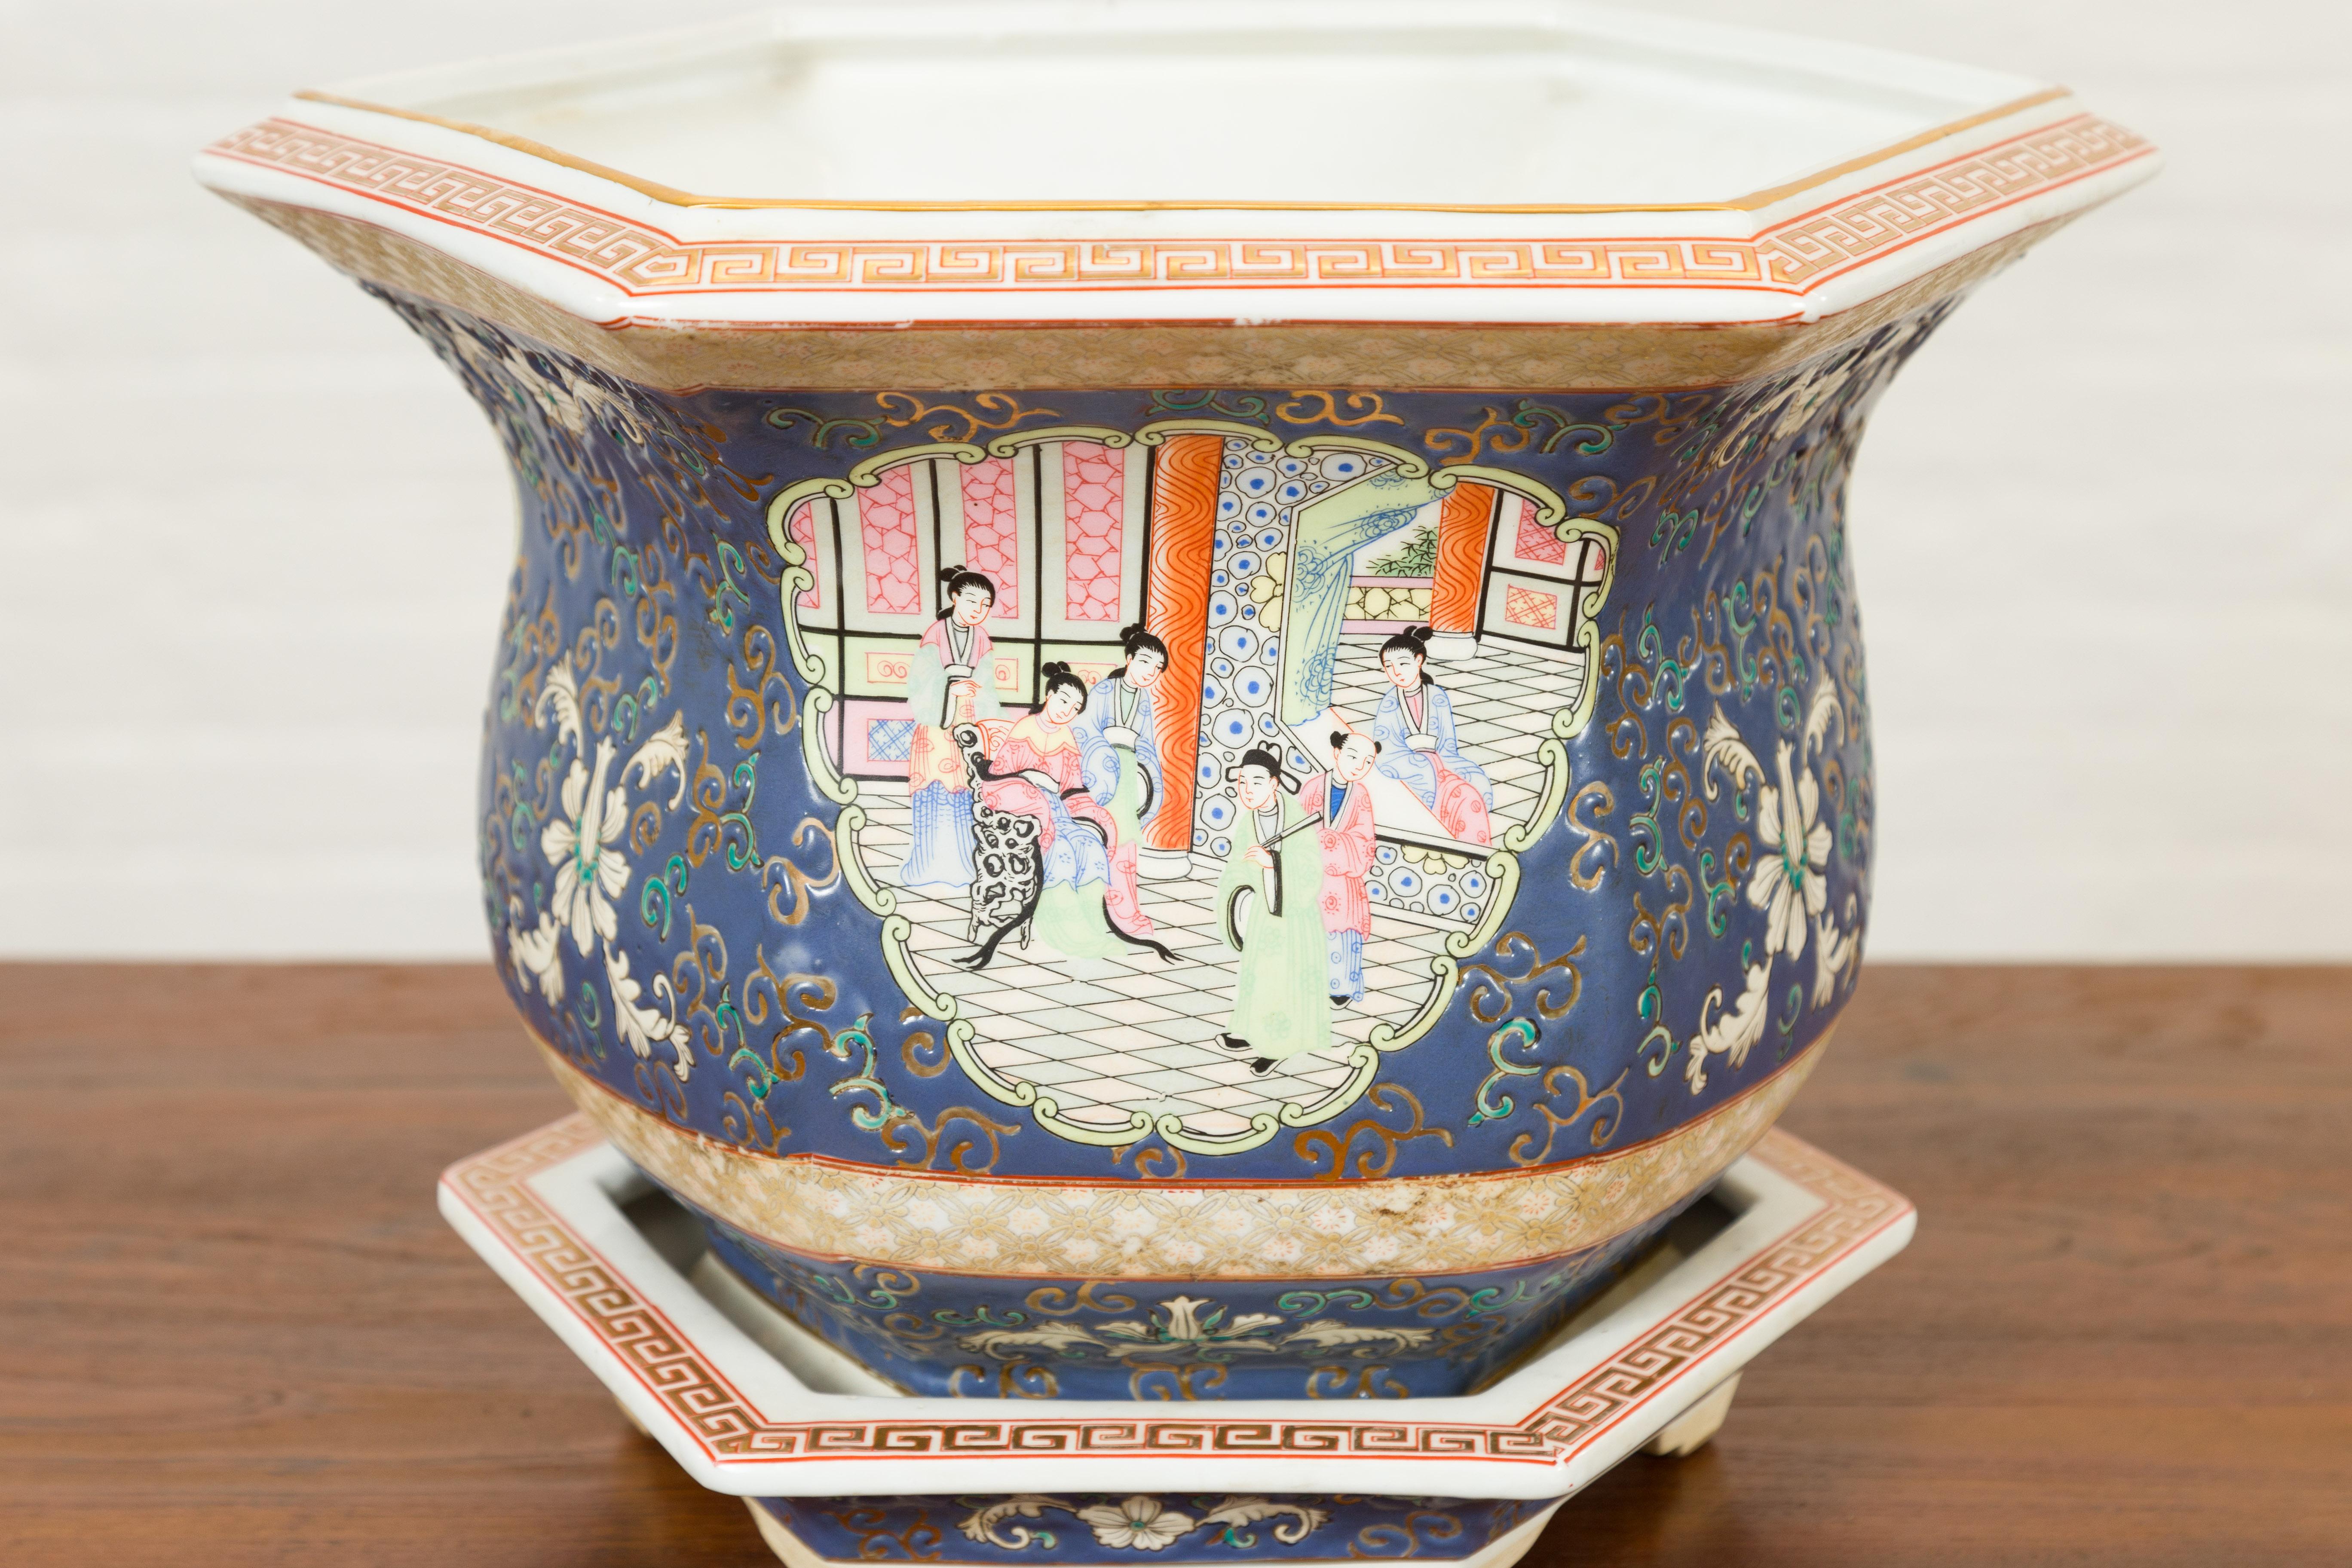 Ceramic Chinese Hexagonal Planter with Hand Painted Courtyard Scenes Depicting Maidens